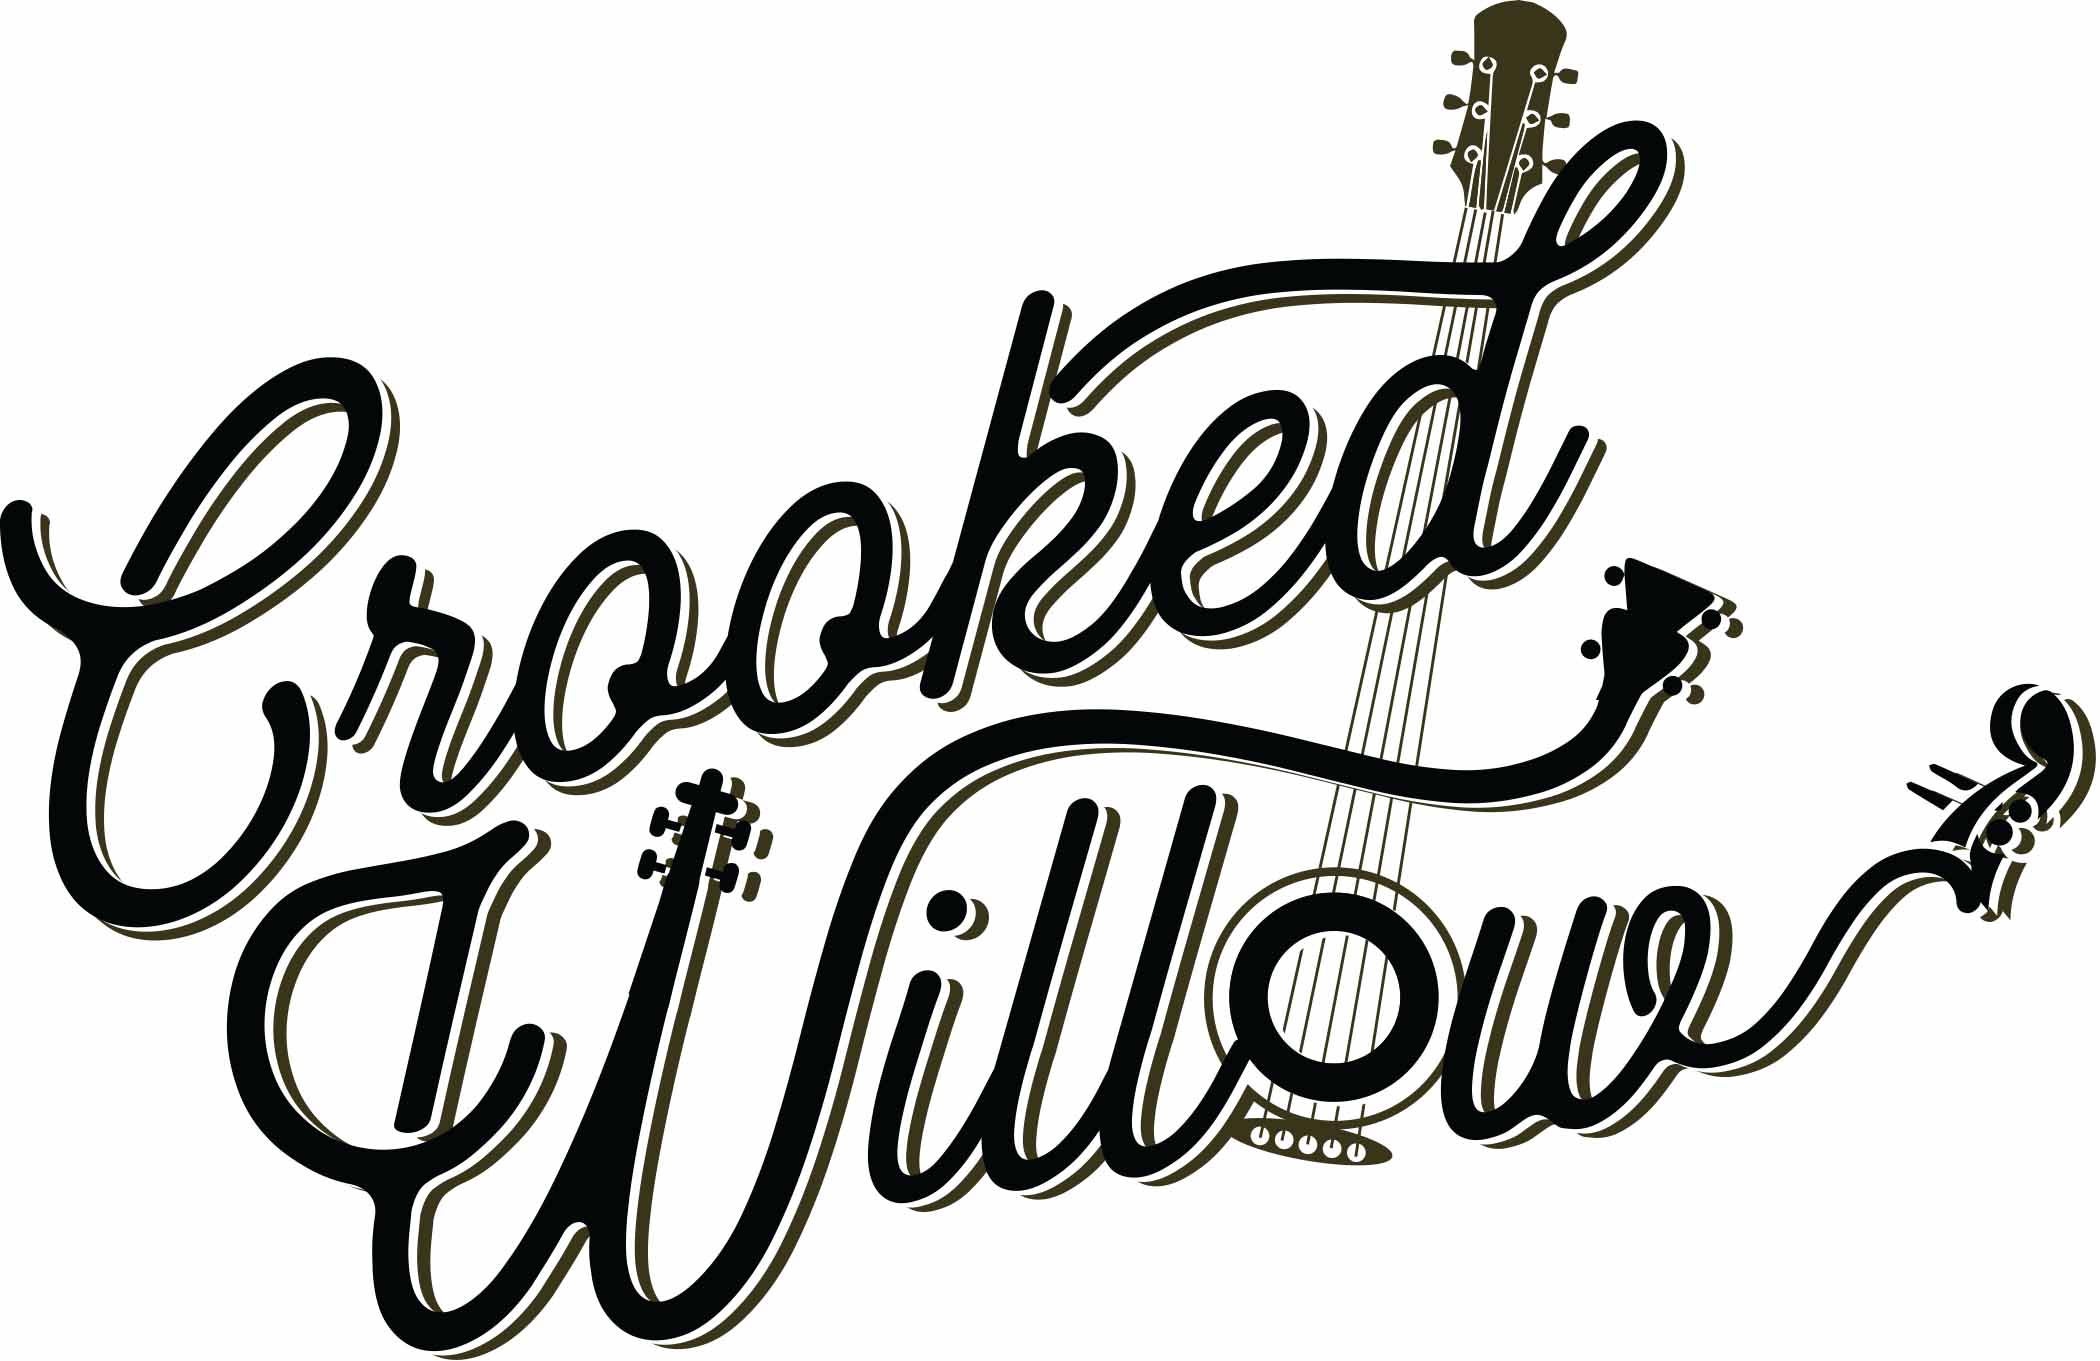 Crooked Willow